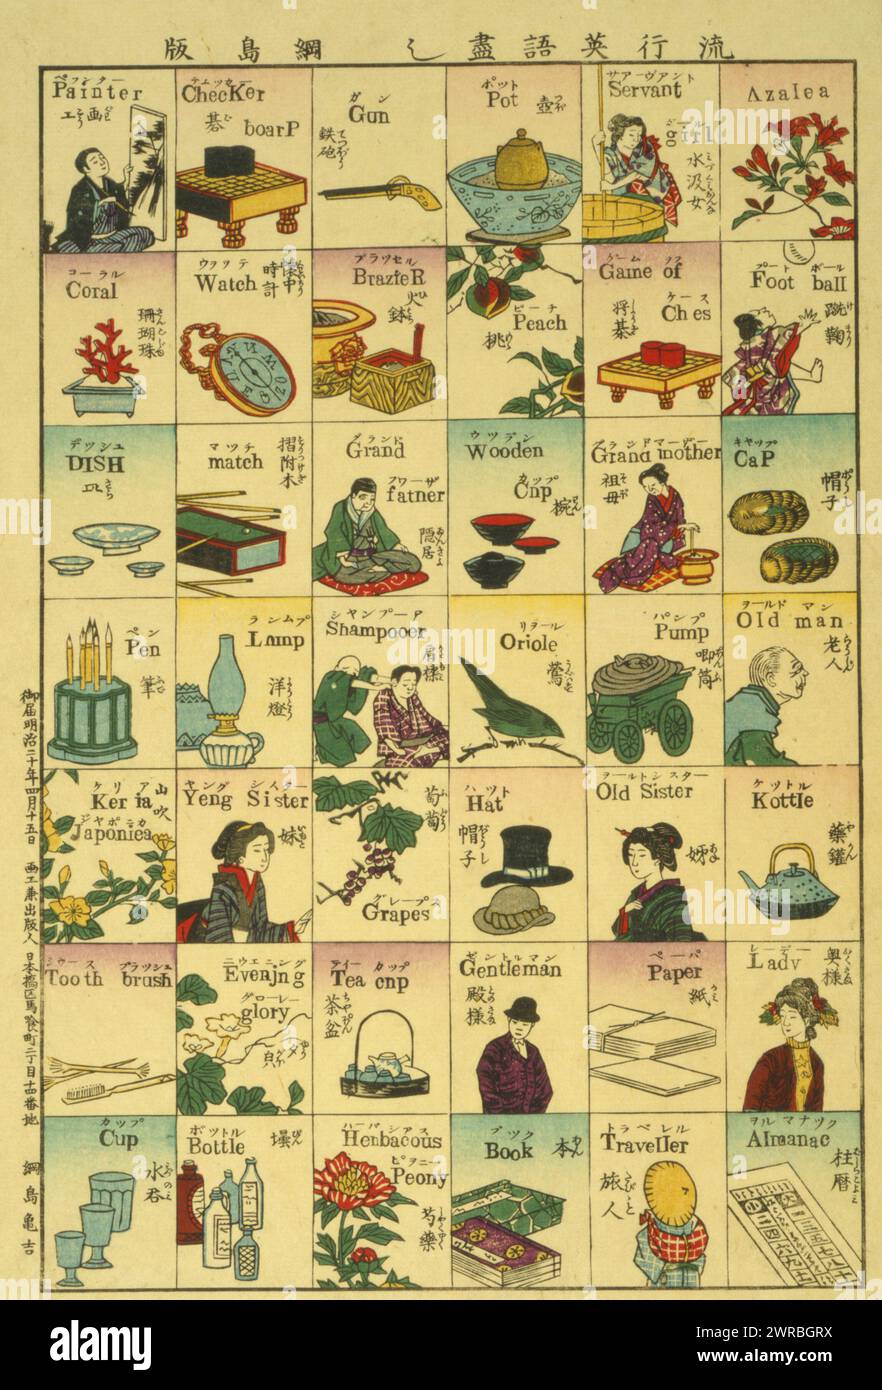 Ryūkō eigo zukushi, Japanese print showing illustrated sampler of foreign everyday objects such as a watch, lamp, and cup; plants such as azalea and peony; and types of people such as a servant girl and gentleman. Each image is labeled in Japanese and English., Tsunajima, Kamekichi, artist, Japan: s.n., 1887., Japanese language, 1880-1890, Woodcuts, Japanese, Color, 1880-1890., Woodcuts, Japanese, Color, 1880-1890, 1 print on hōsho paper: woodcut, color, 35.5 x 22 cm. (block), 36 x 24 cm. (sheet Stock Photo